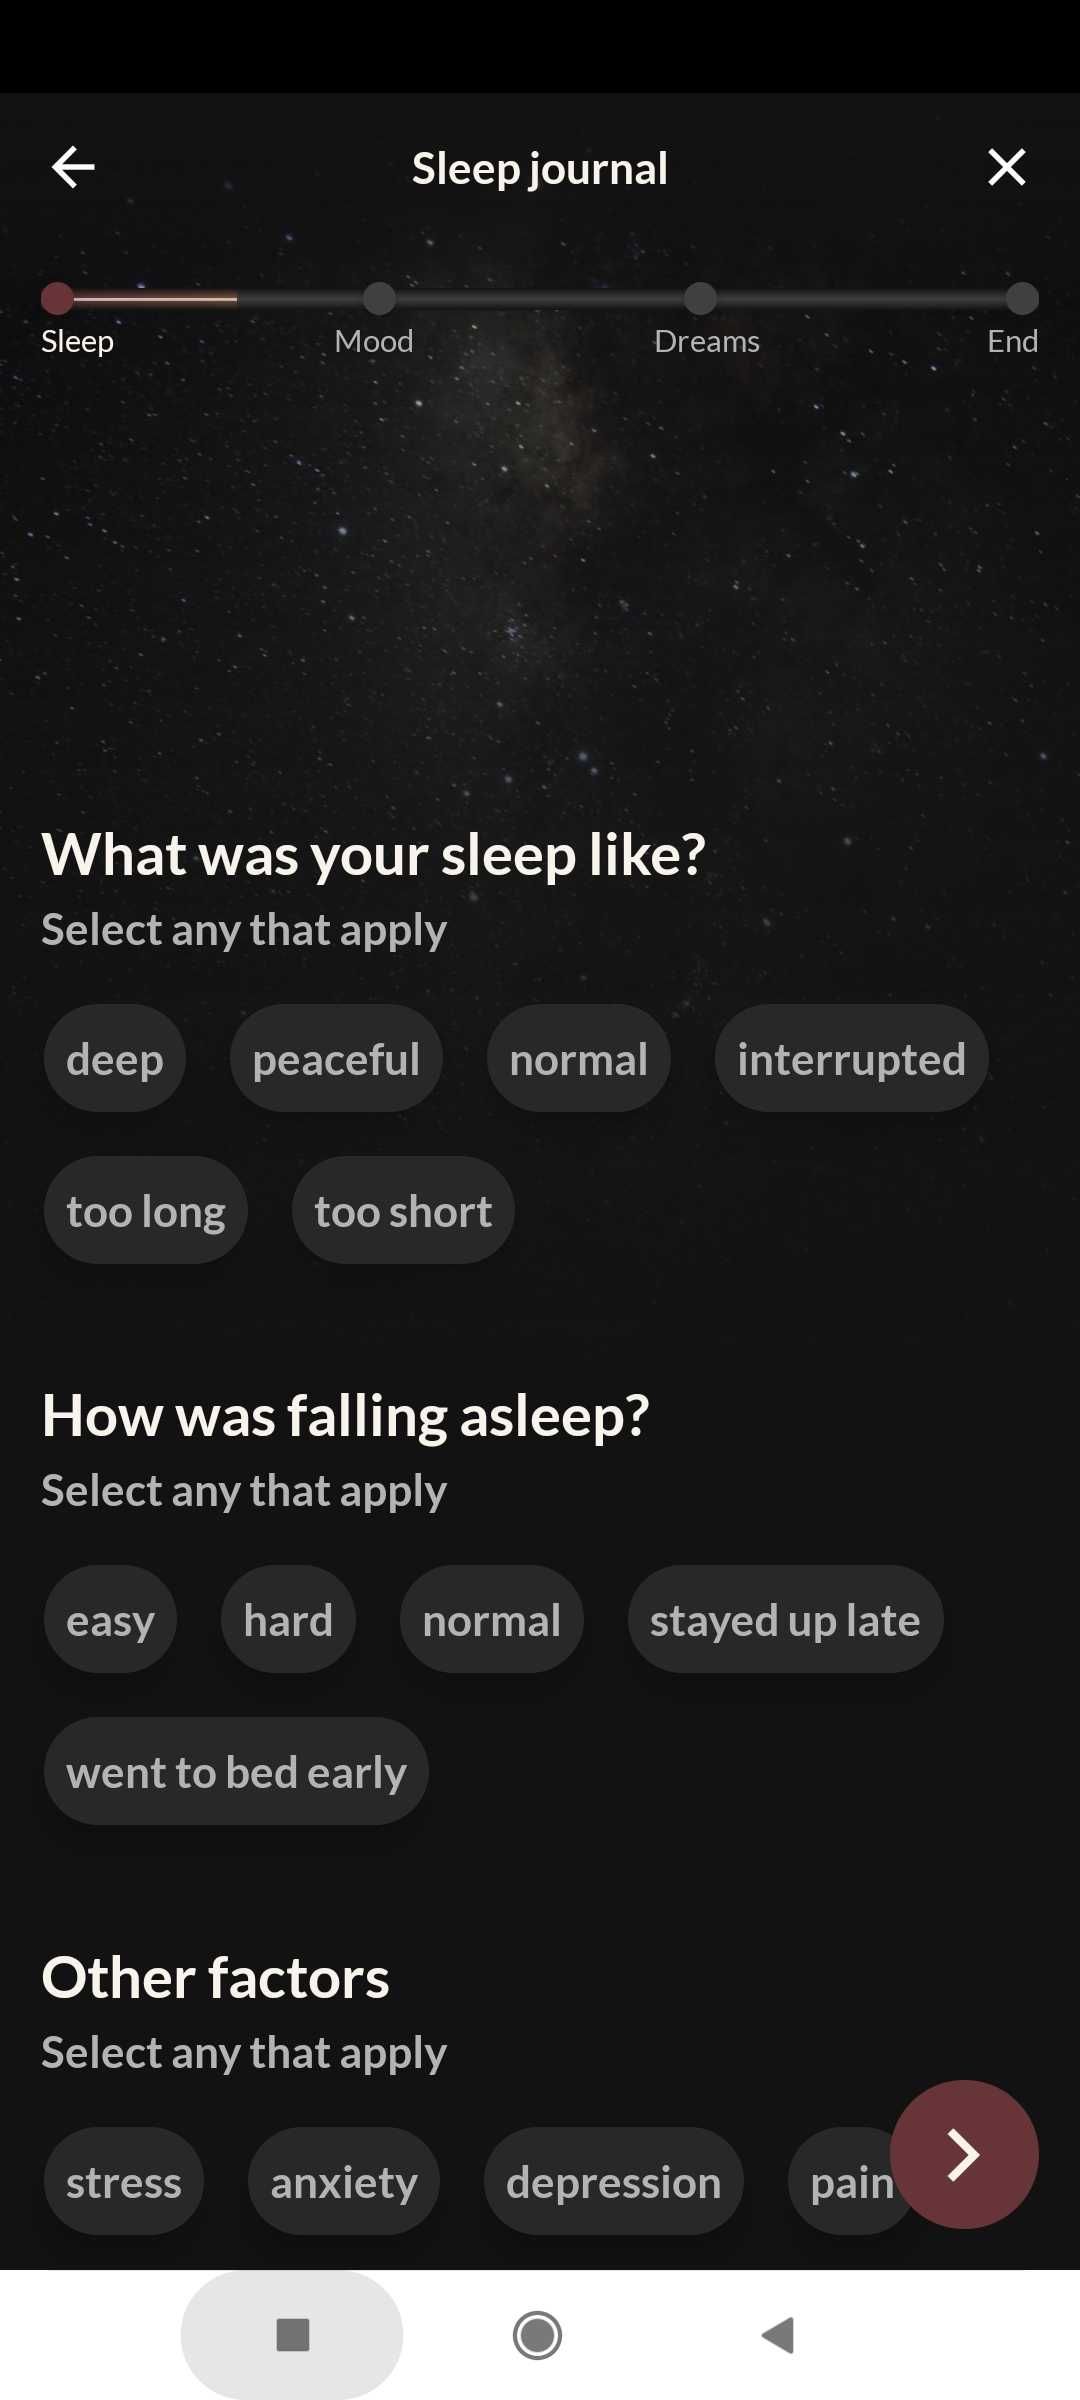 DreamWell's sleep journal gives you multiple-choice options to track your dreams, sleep, and moods